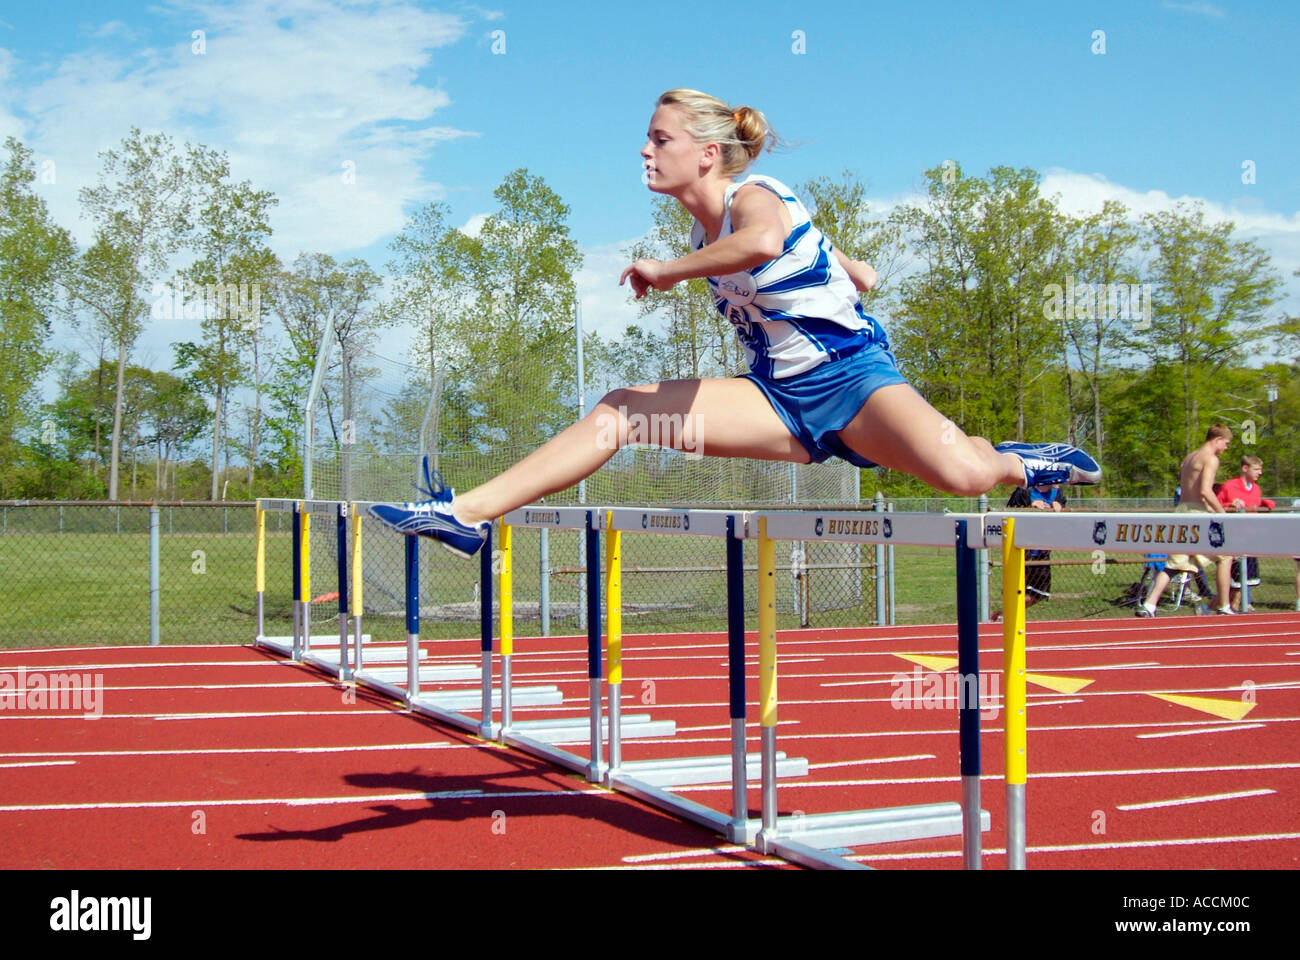 Hurdles school hires stock photography and images Alamy